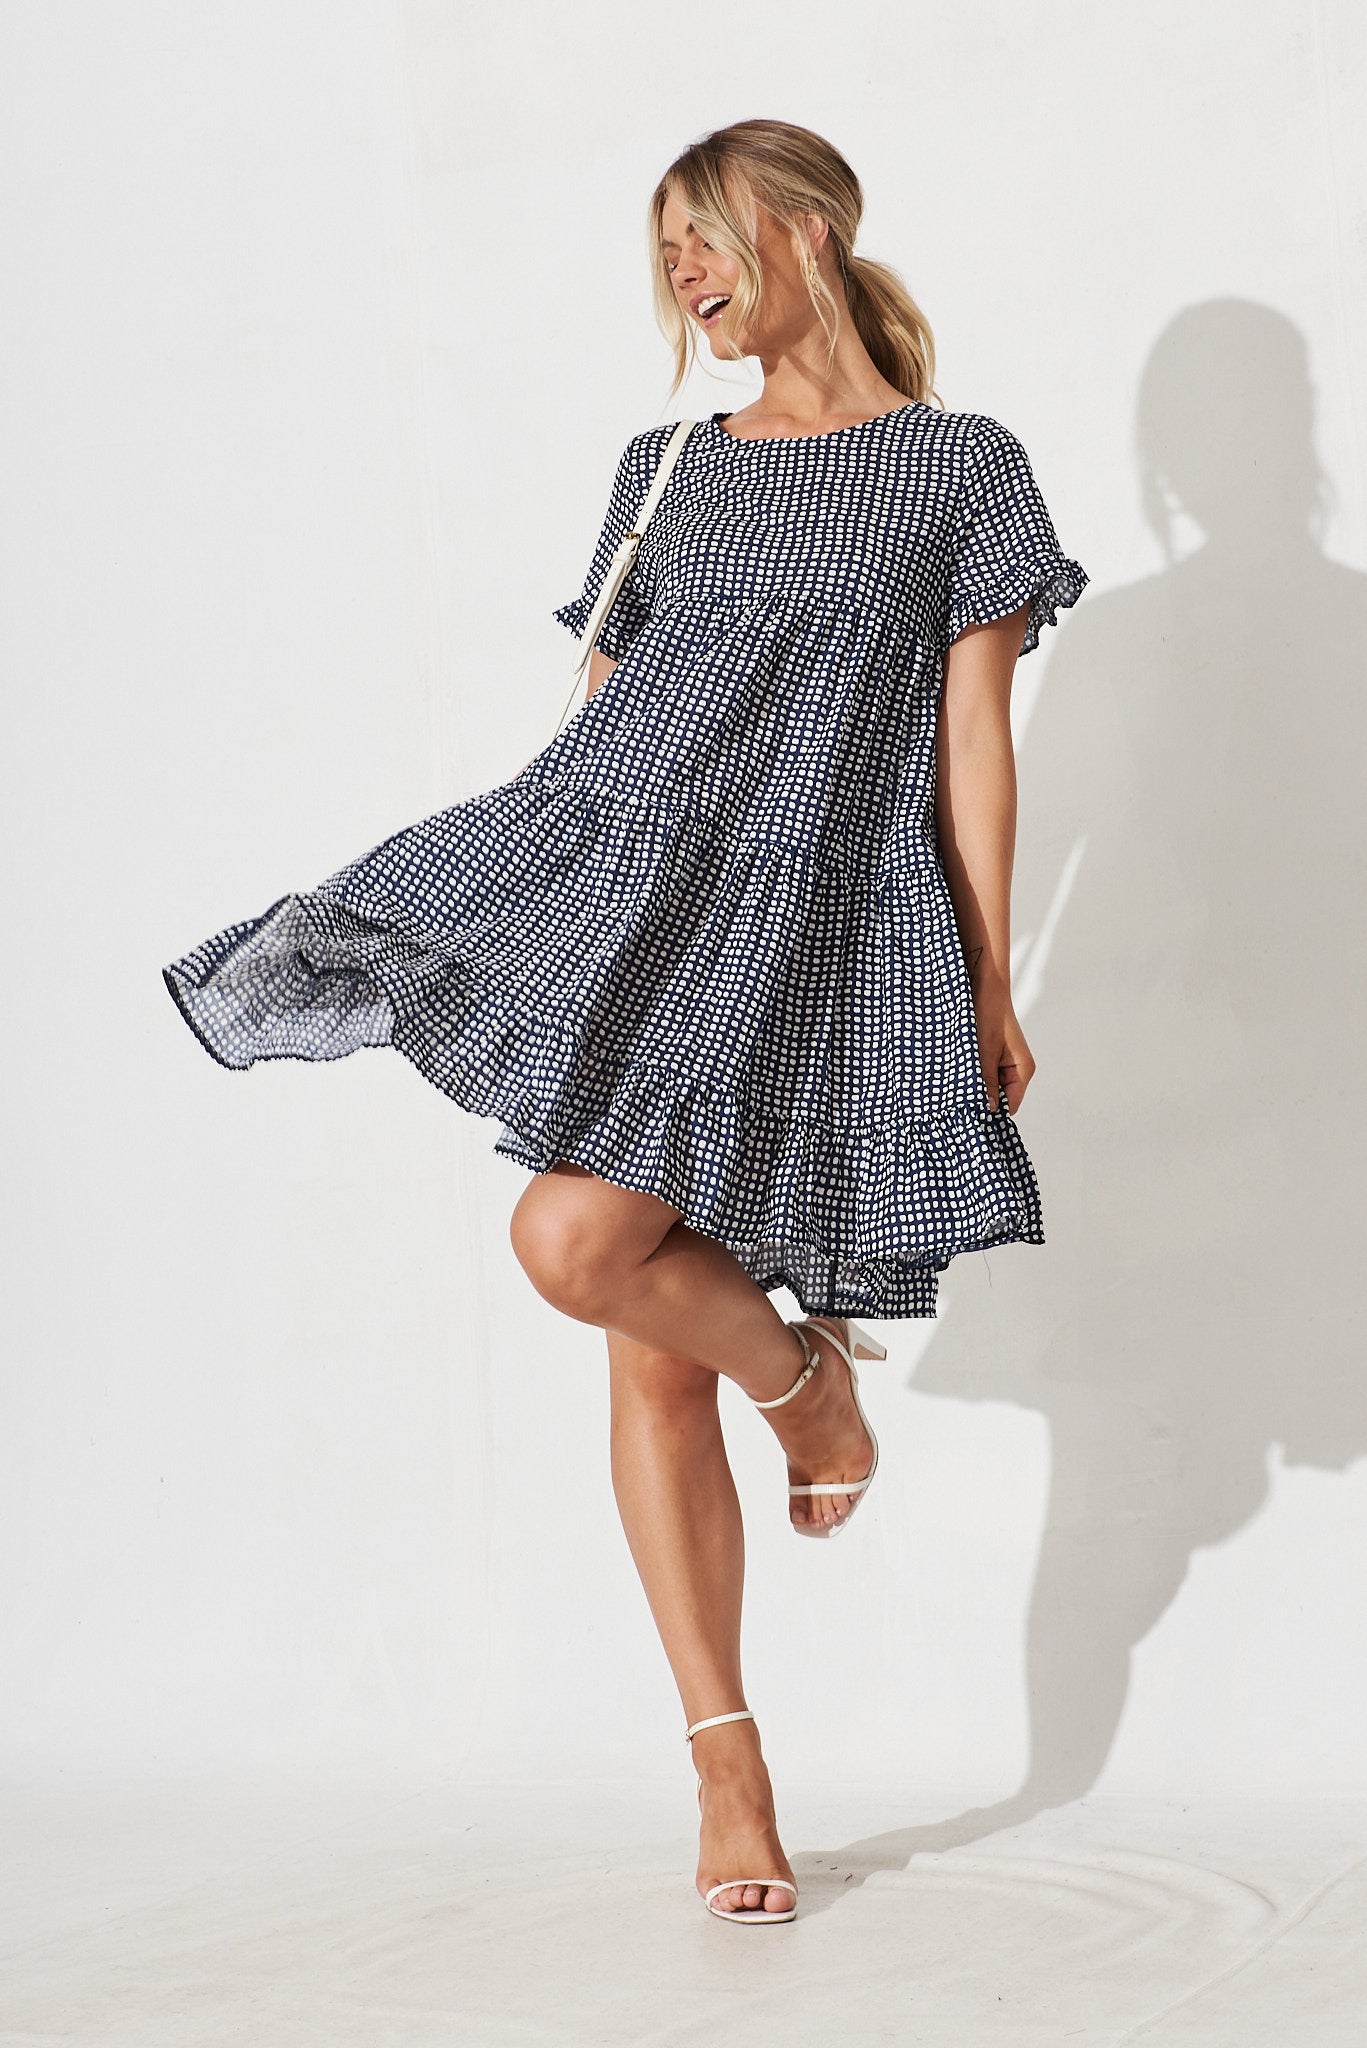 Emory Smock Dress In Navy With White Check Cotton - full length